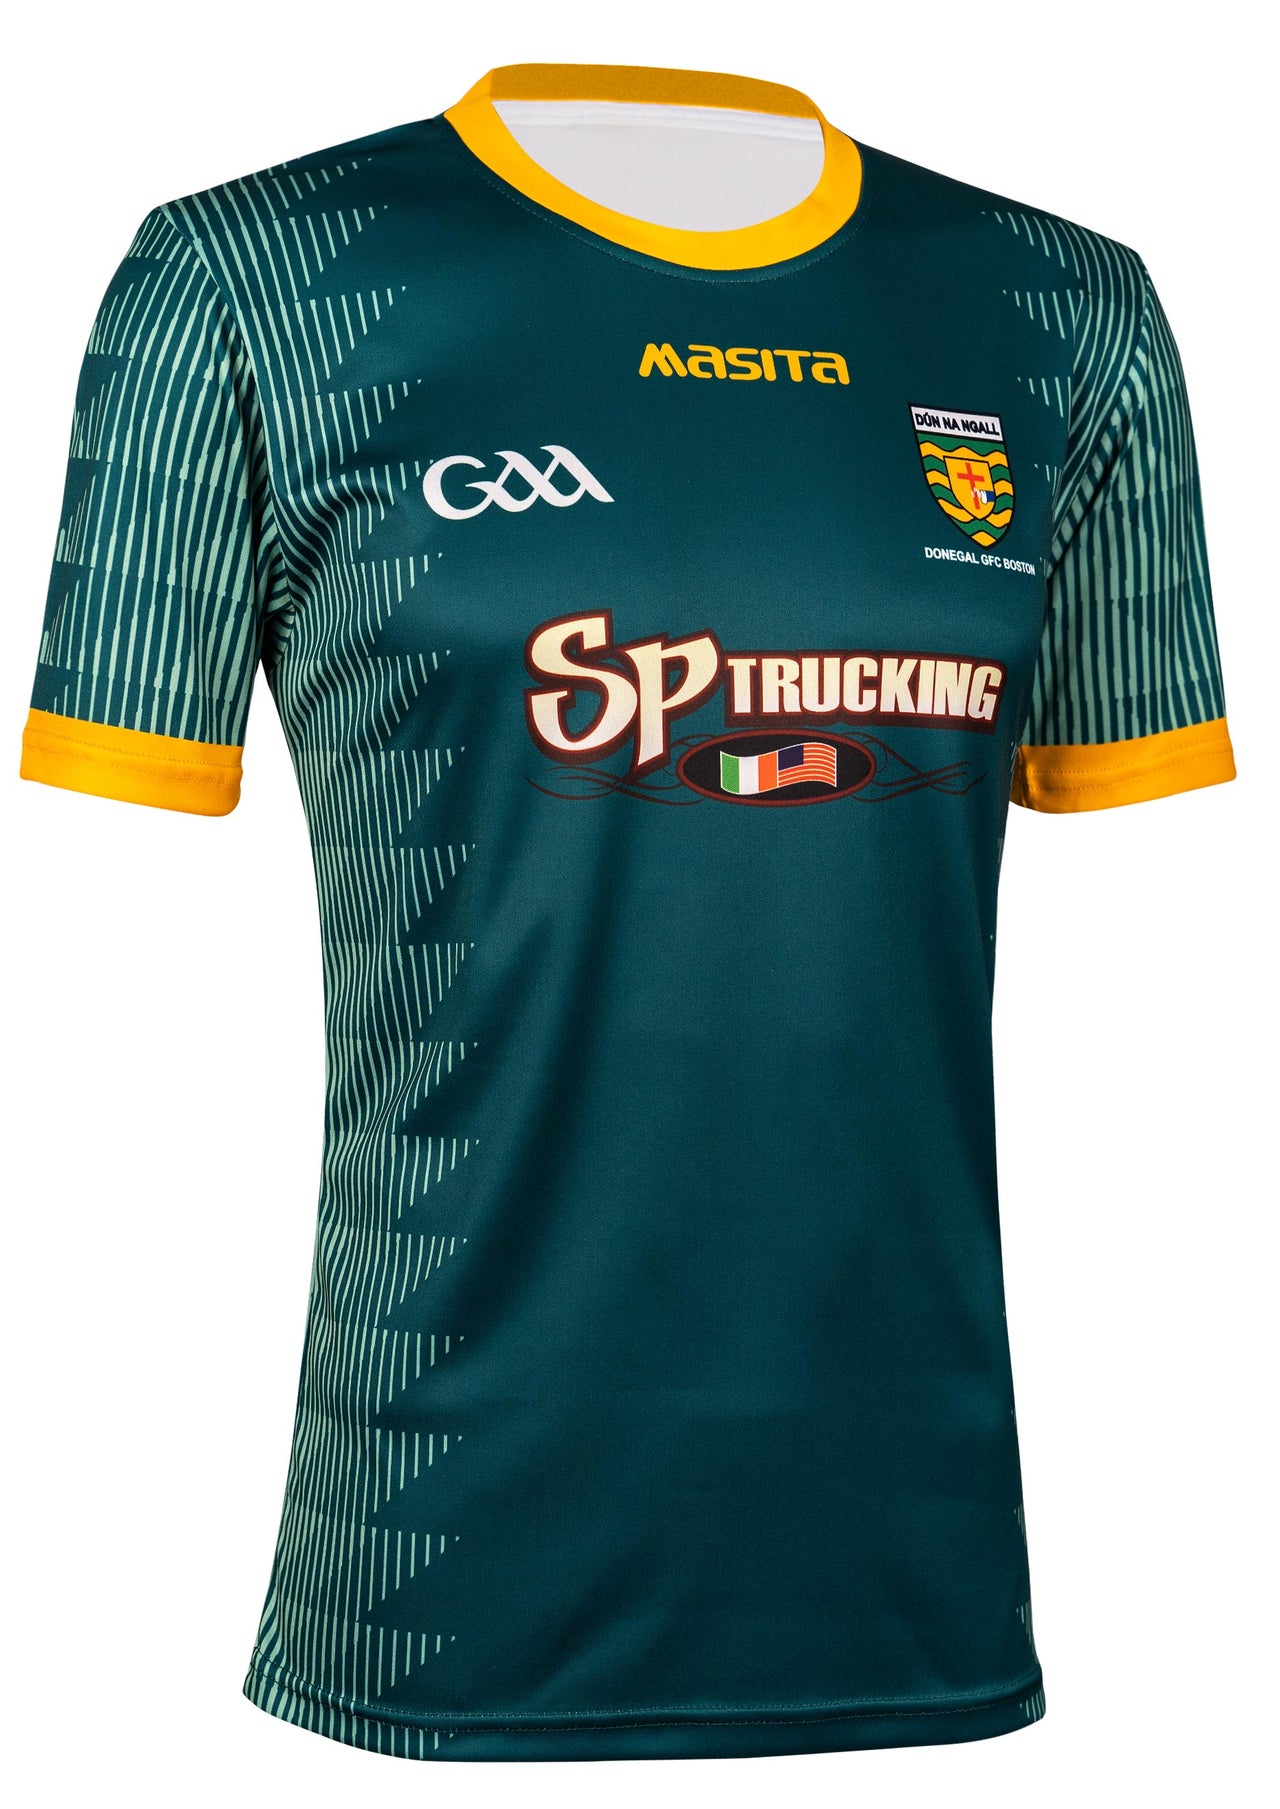 Donegal Boston Special Edition Jersey Regular Fit Adult